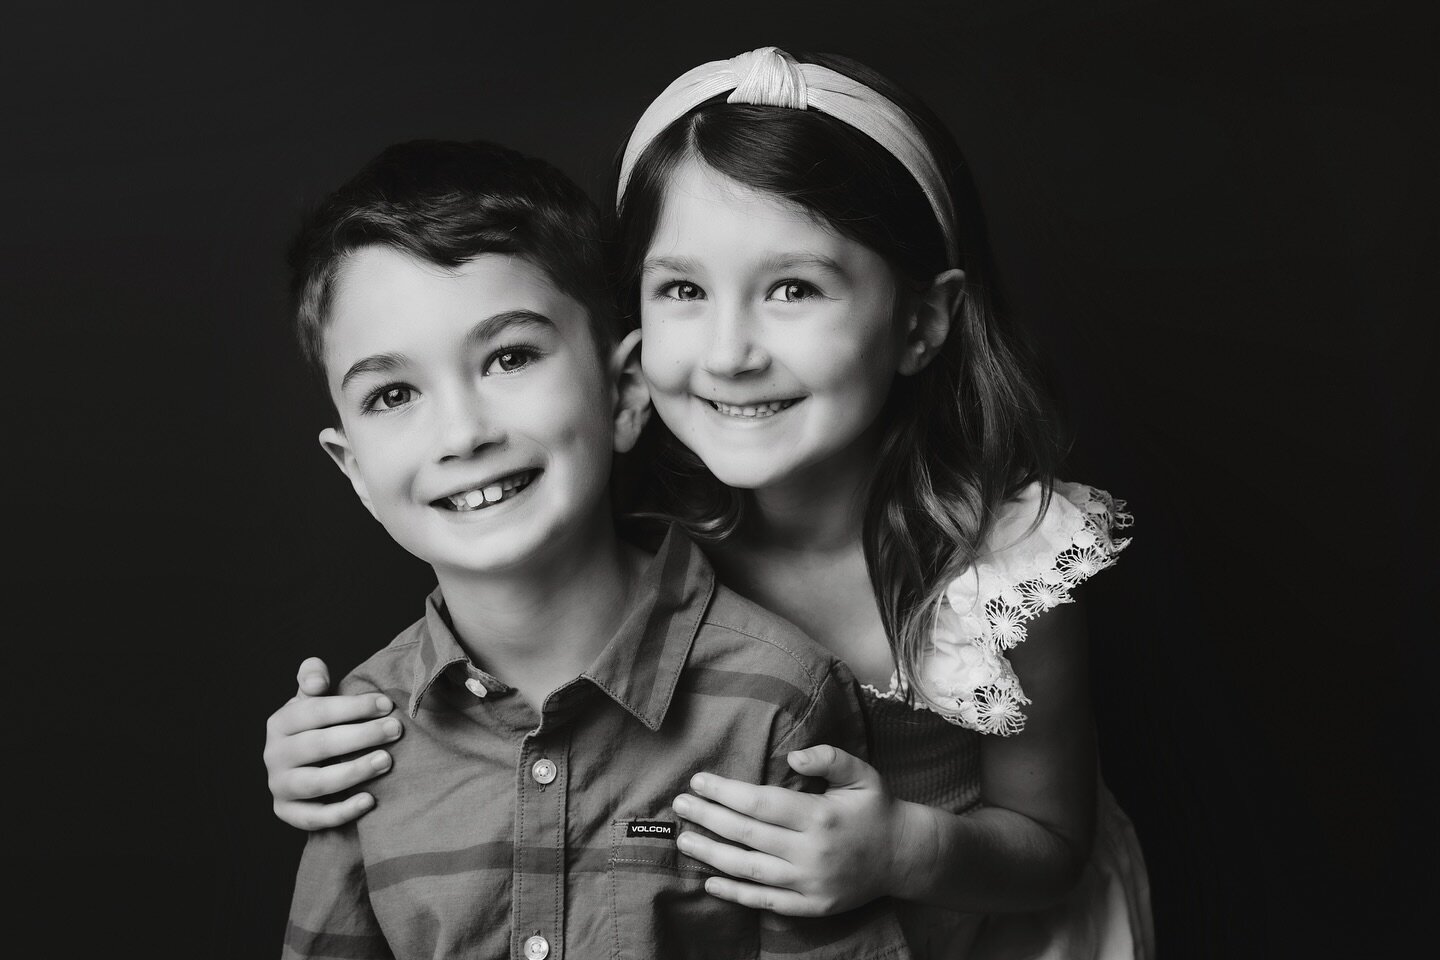 Beautiful siblings 🤍 that connection is such a joy to capture and something they&rsquo;ll appreciate when they&rsquo;re adults.

#NewportBeachFamilyPhotographer
#FamilyPhotographyOC
#NewportBeachKids
#OrangeCountyFamilies
#FamilyPortraitSessions
#So